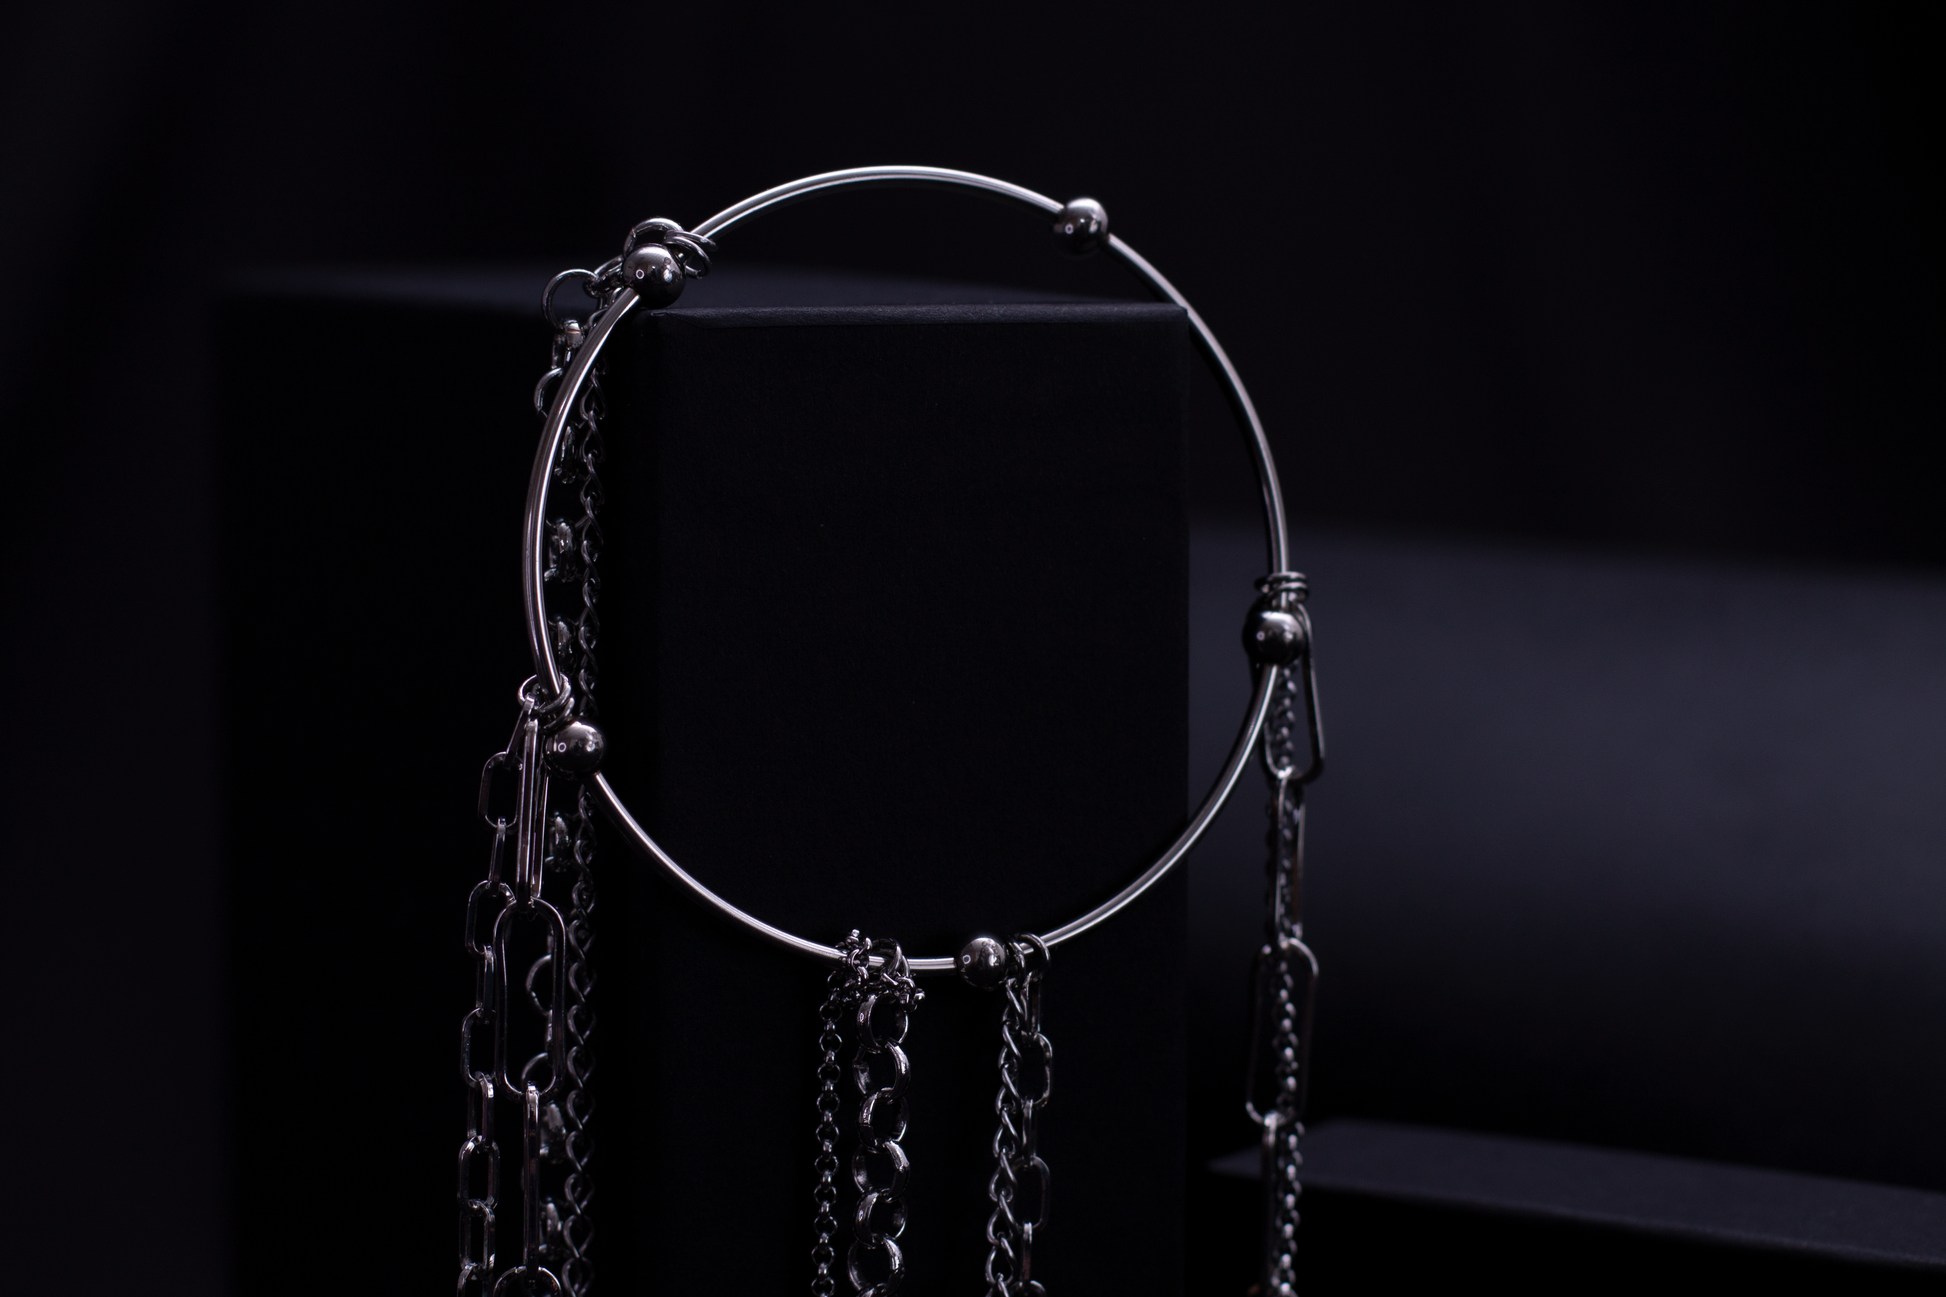 Discover Myril Jewels' neo-goth rigid bracelet with cascading chains, ideal for gothic connoisseurs seeking dark, avant-garde accessories for any edgy ensemble